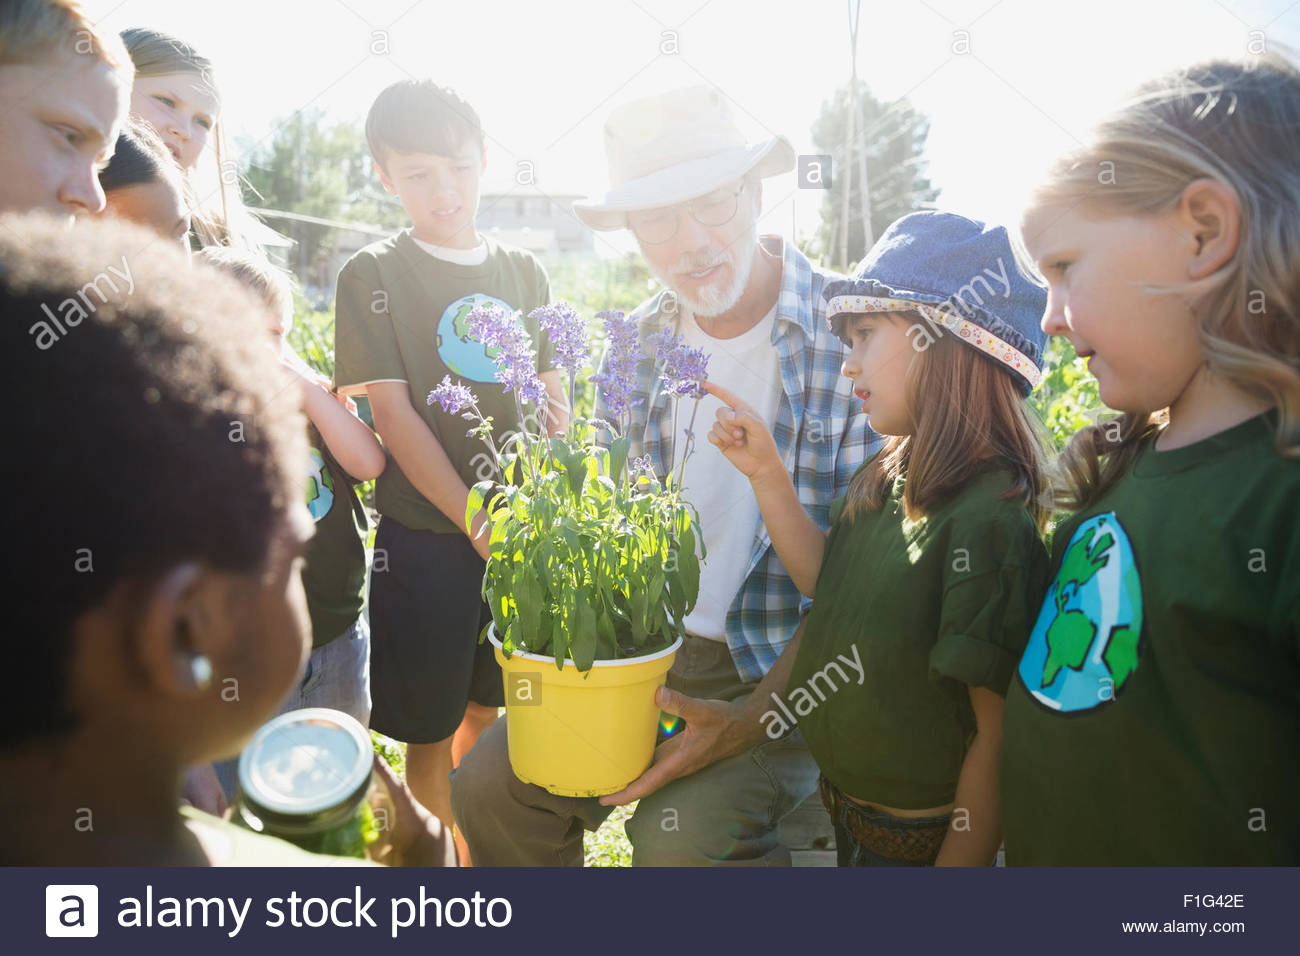 Garden expert showing potted flower to kids Stock Photo